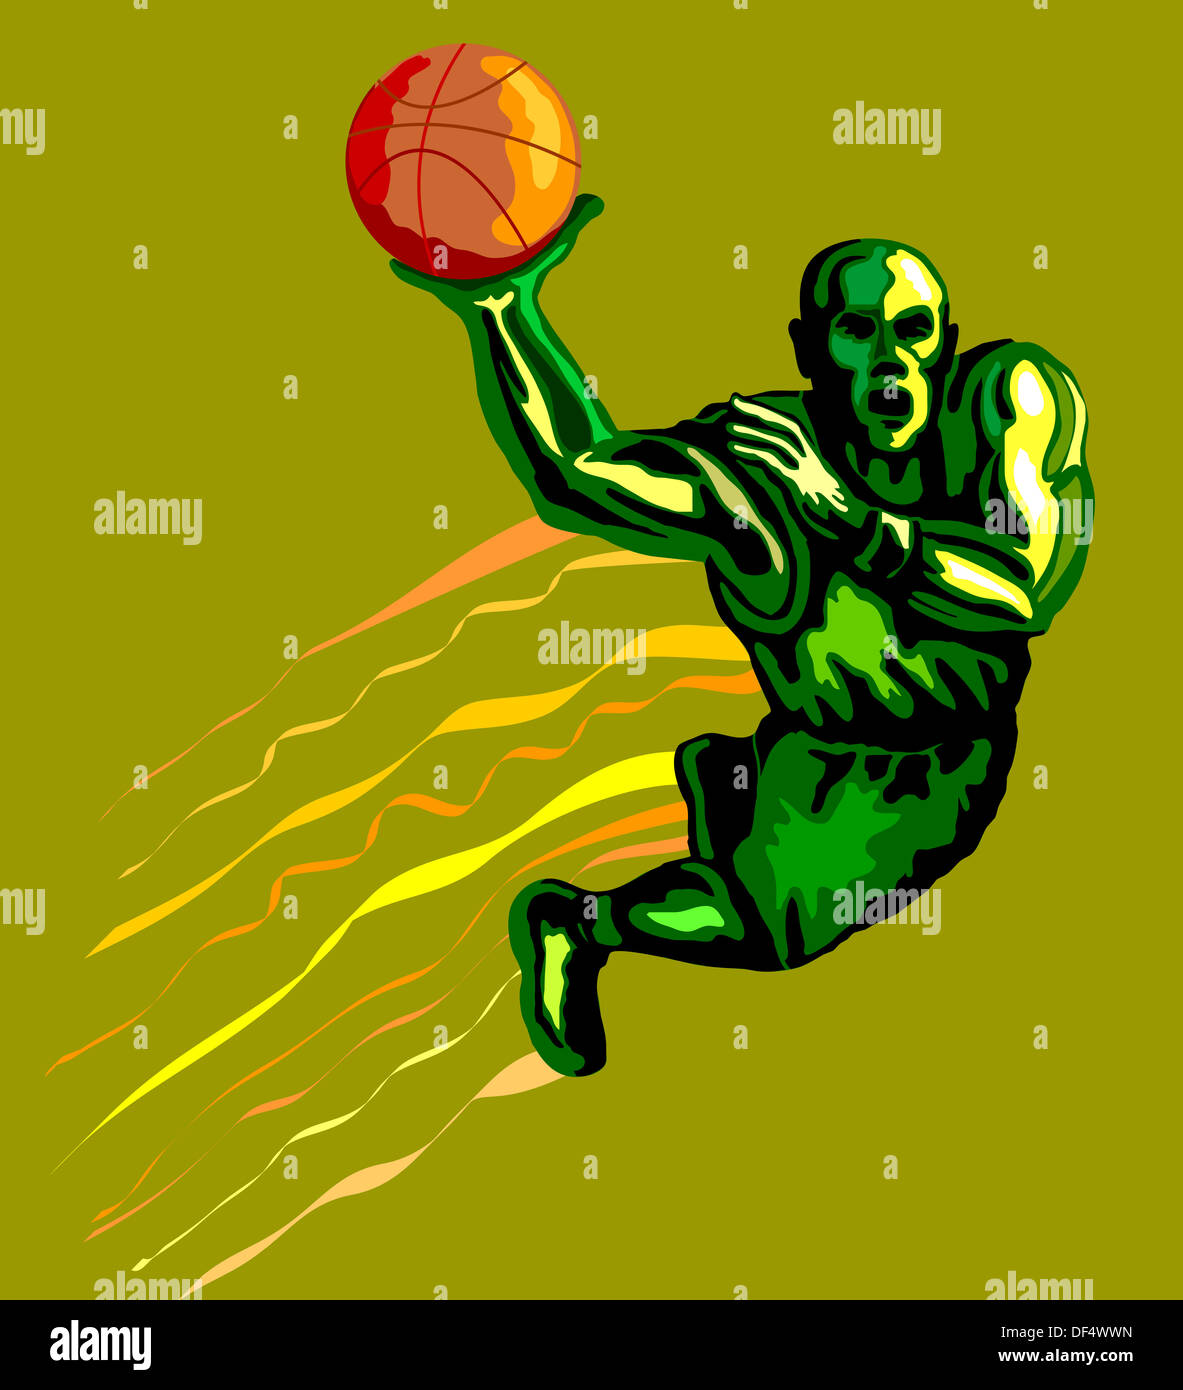 Illustration of a green basketball player dunking ball. Stock Photo